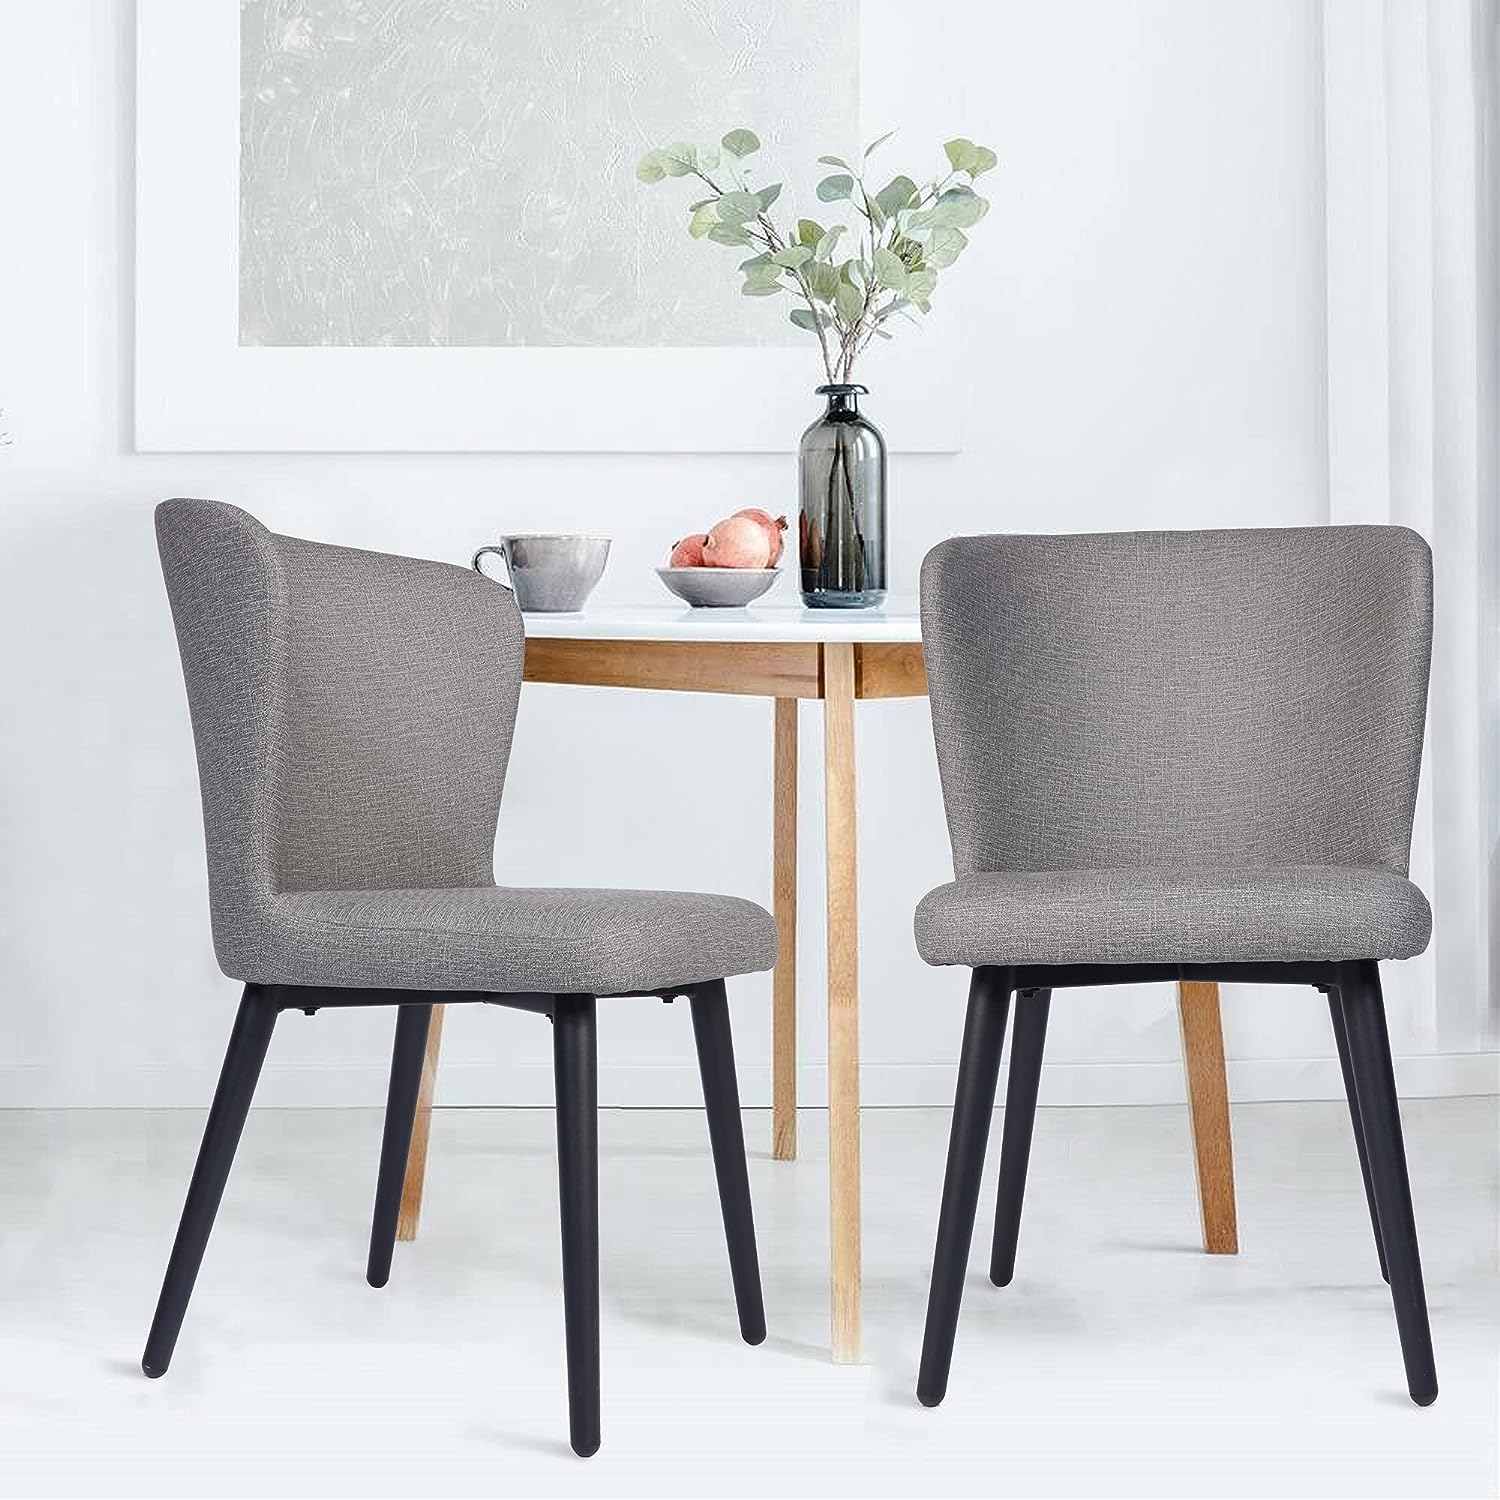 LUCKYERMORE Set of 2 Dining Room Chairs Upholstered Side Chairs with Soft PU Leather Seat Backrest, Gray